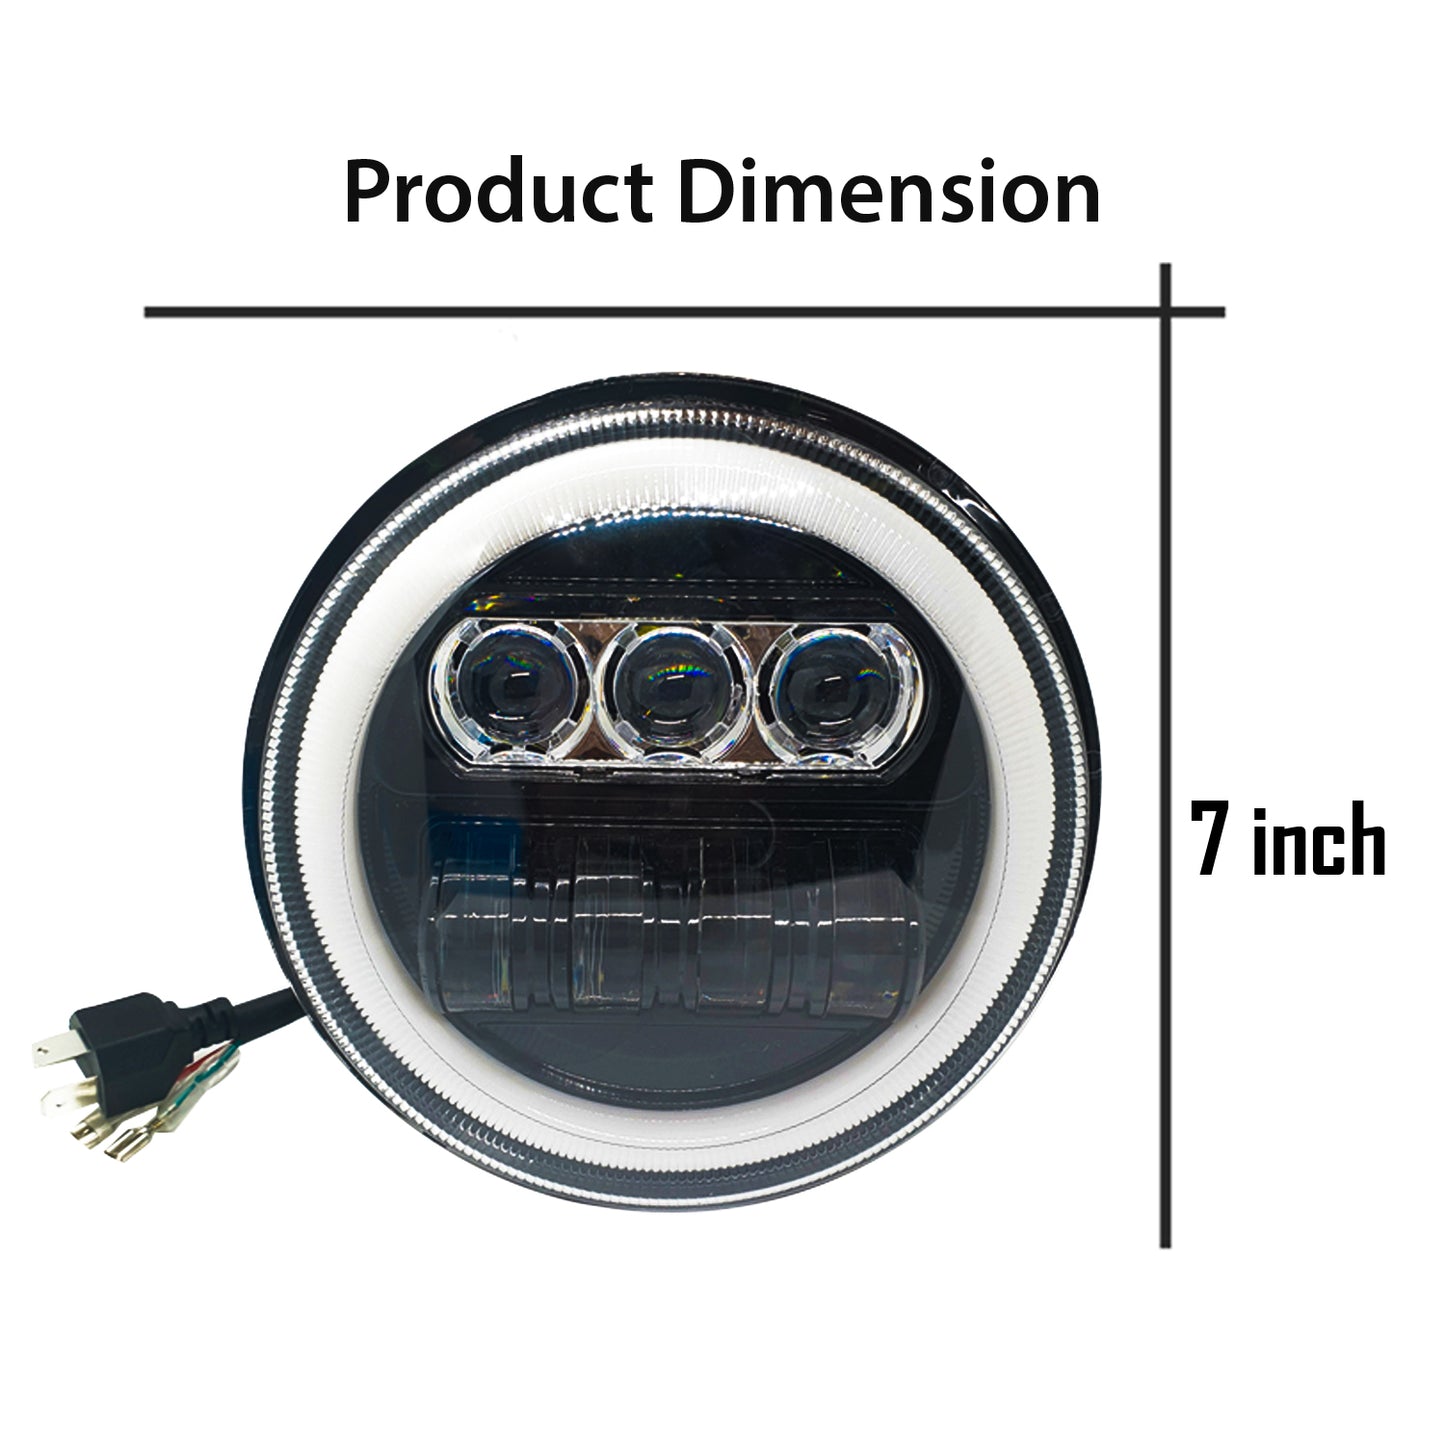 7 Inch New Round LED Headligh Fits in Jawa with High Beam, Low Beam (12V-80V 75W) - bikerstore.in